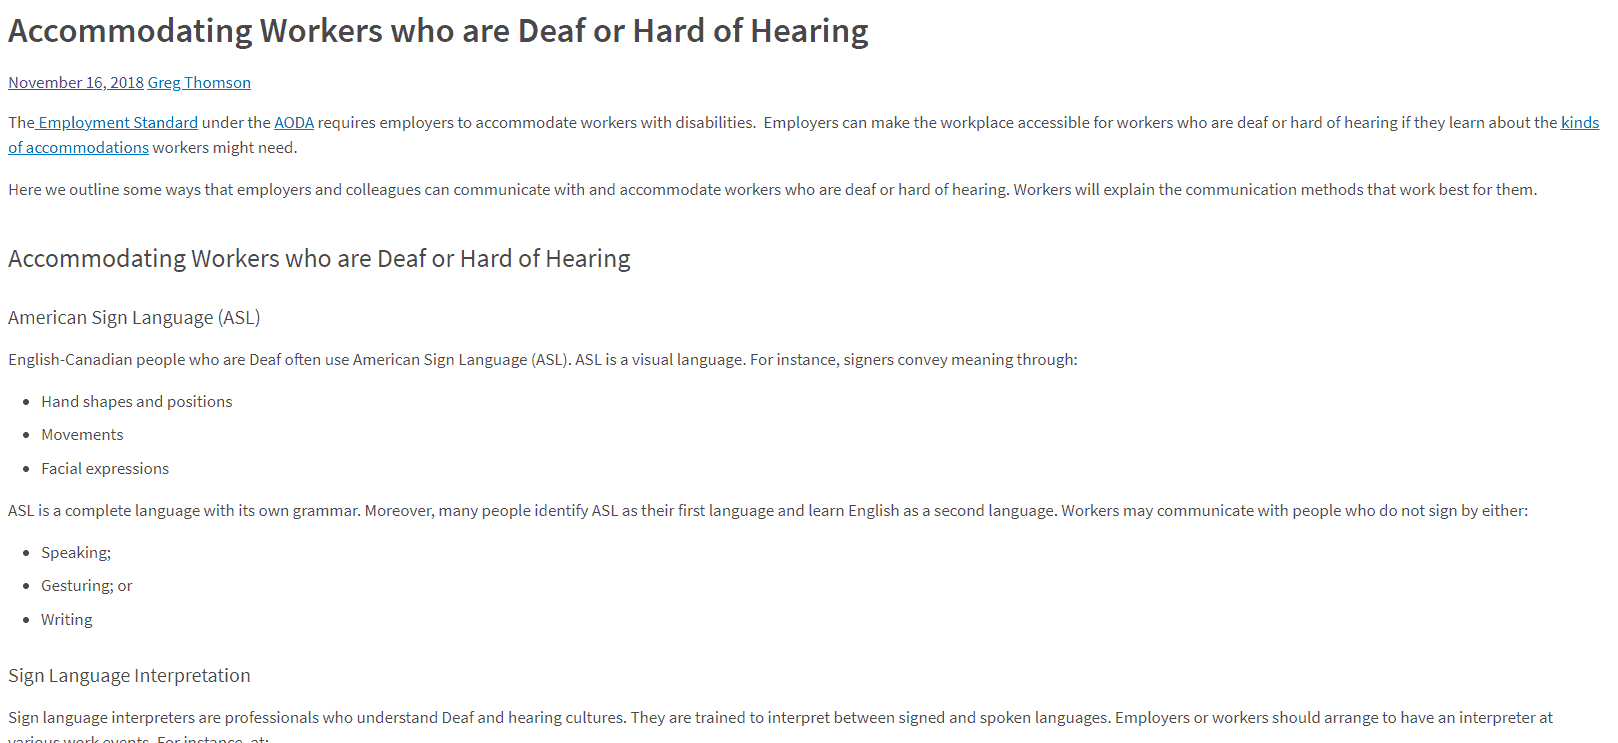 Accommodating Workers who are Deaf or Hard of Hearing